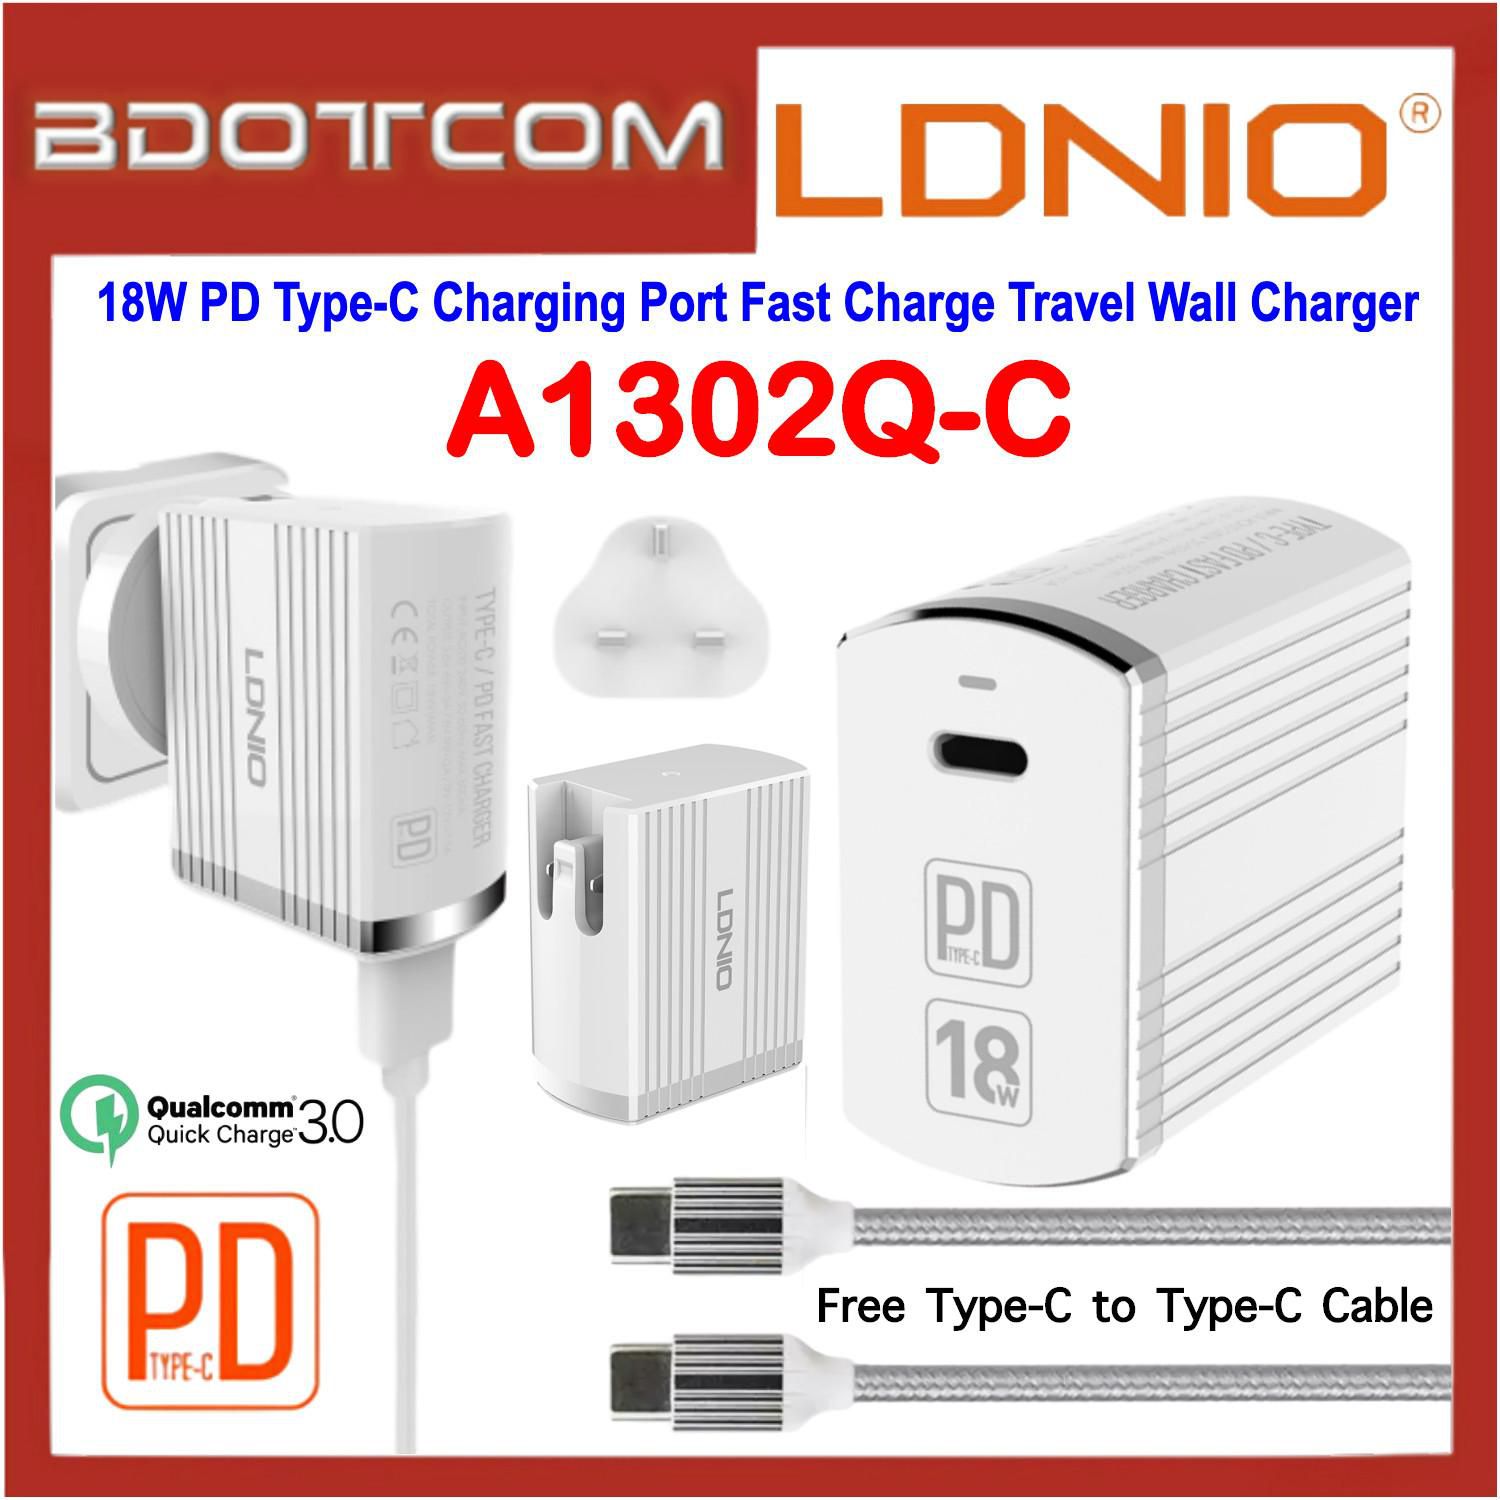 LDNIO 18WPD QC3.0 Fast Charge Travel Wall Charger for Samsung A1302Q-C